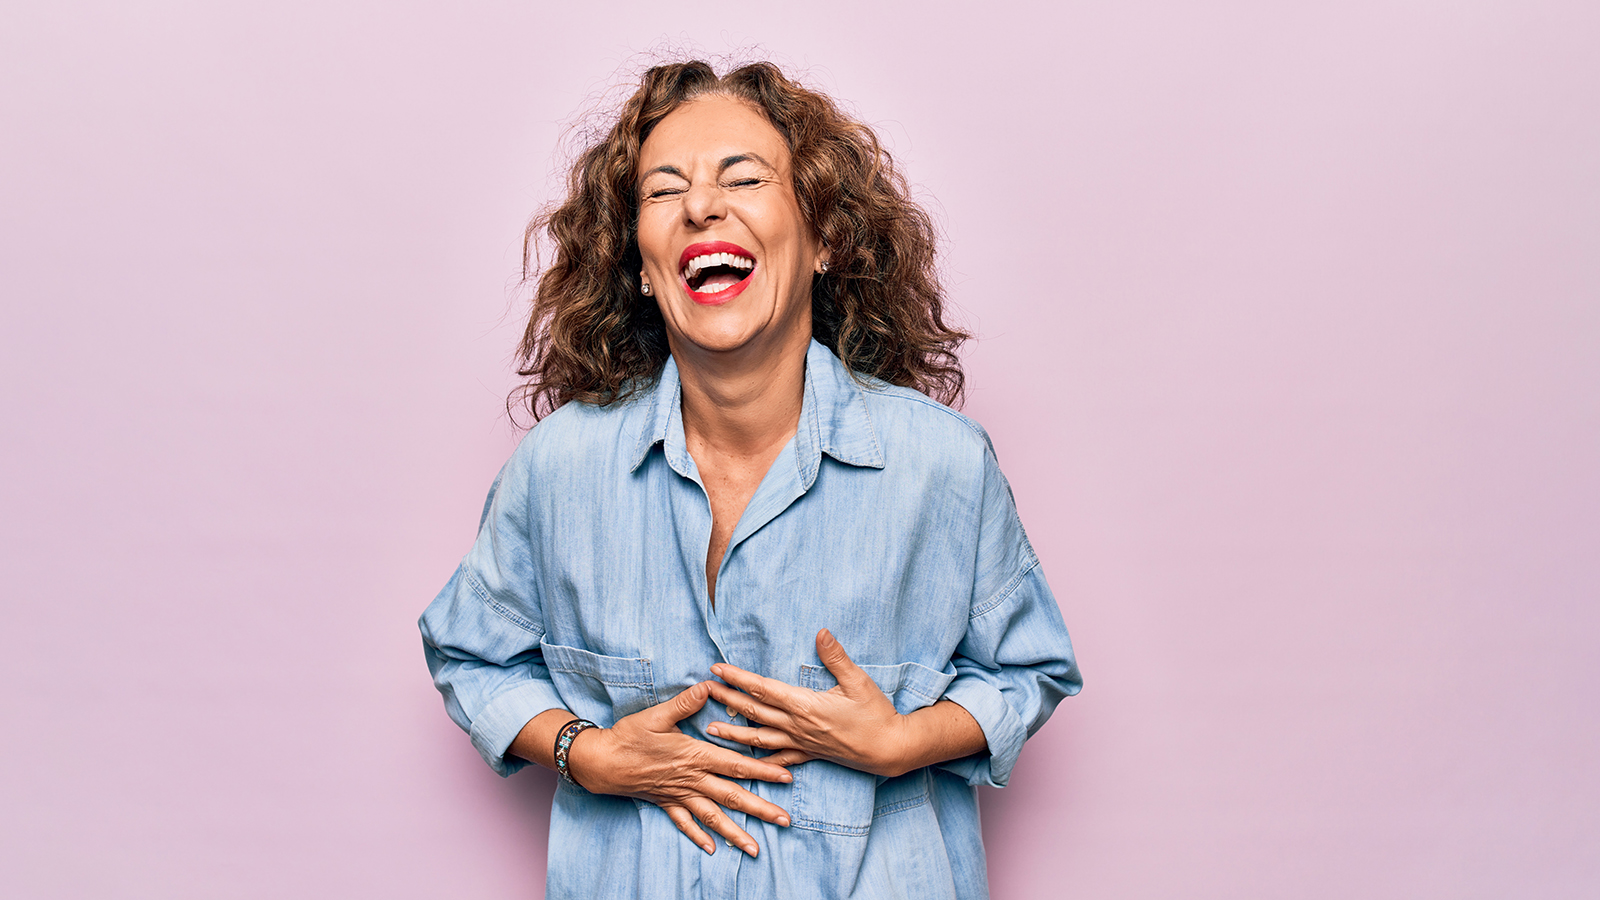 Middle age beautiful woman wearing casual denim shirt standing over pink background smiling and laughing hard out loud because funny crazy joke with hands on body.